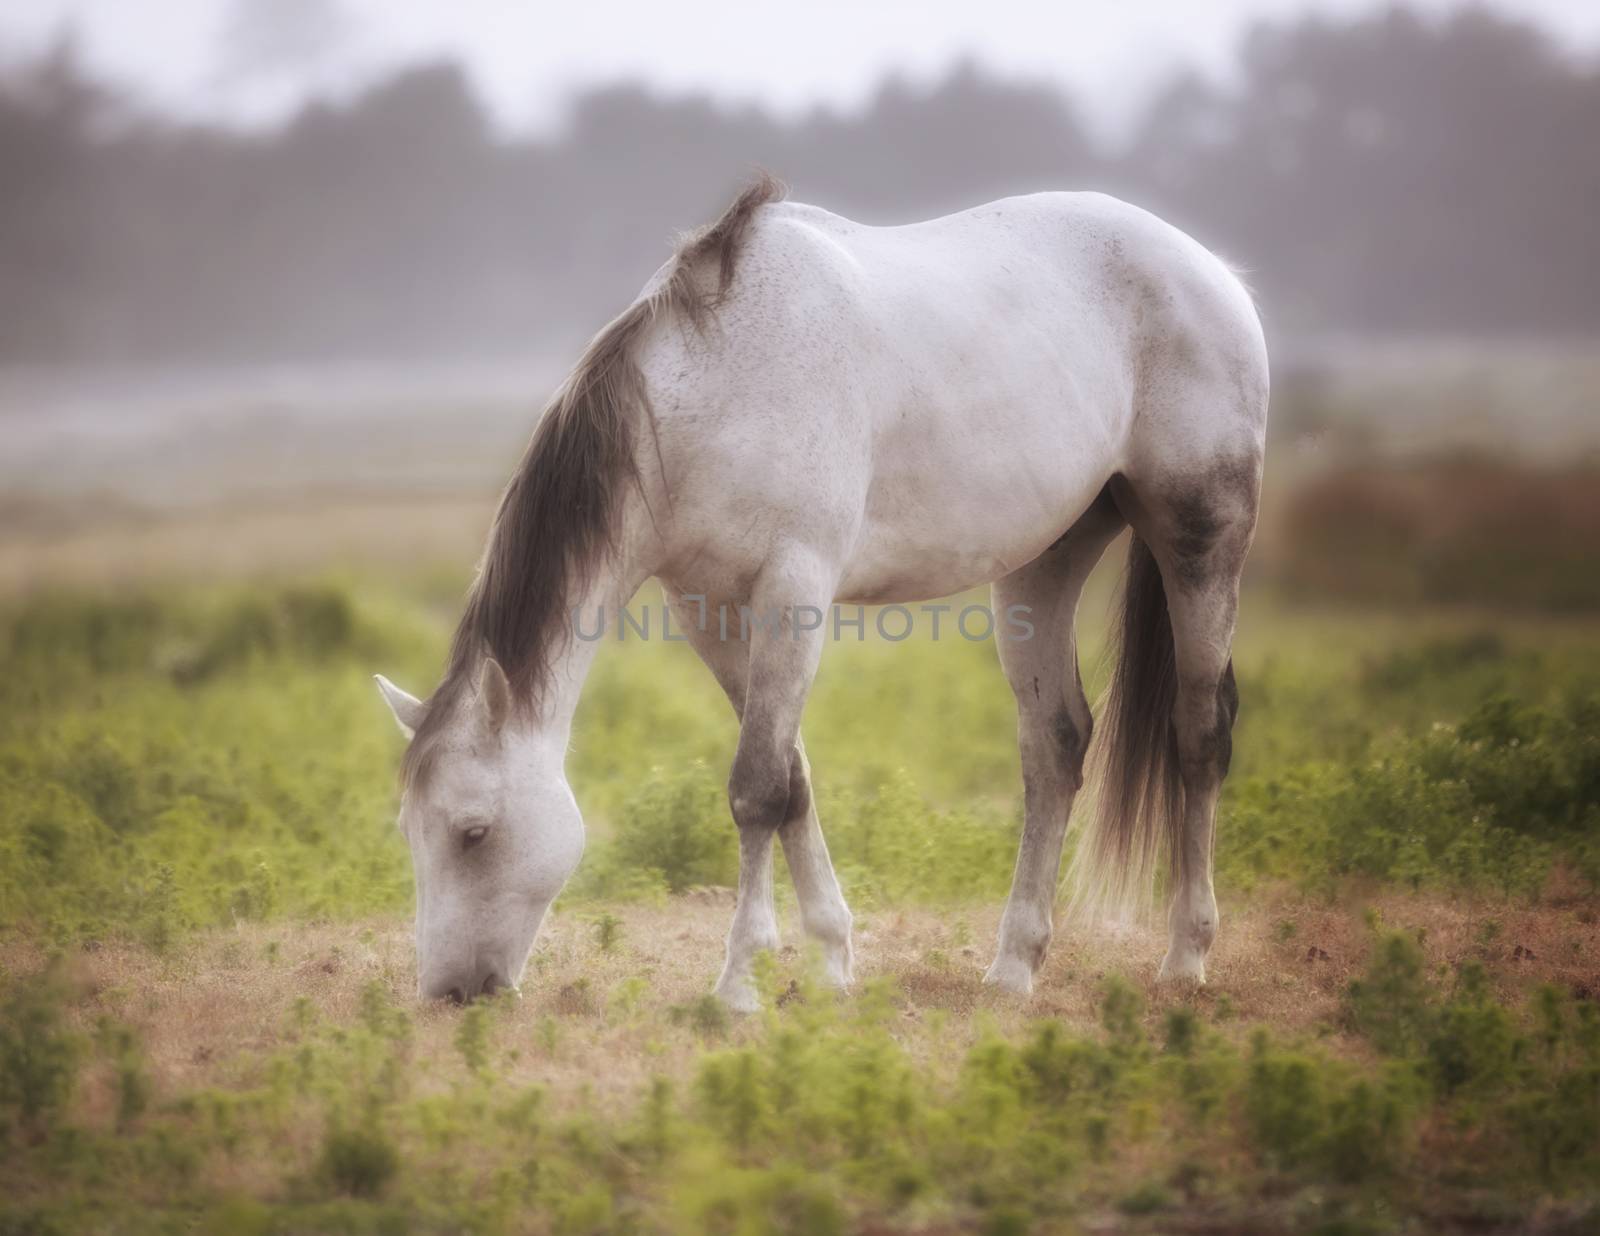 Horse in a Pasture on a Foggy Day Northern California, USA by backyard_photography